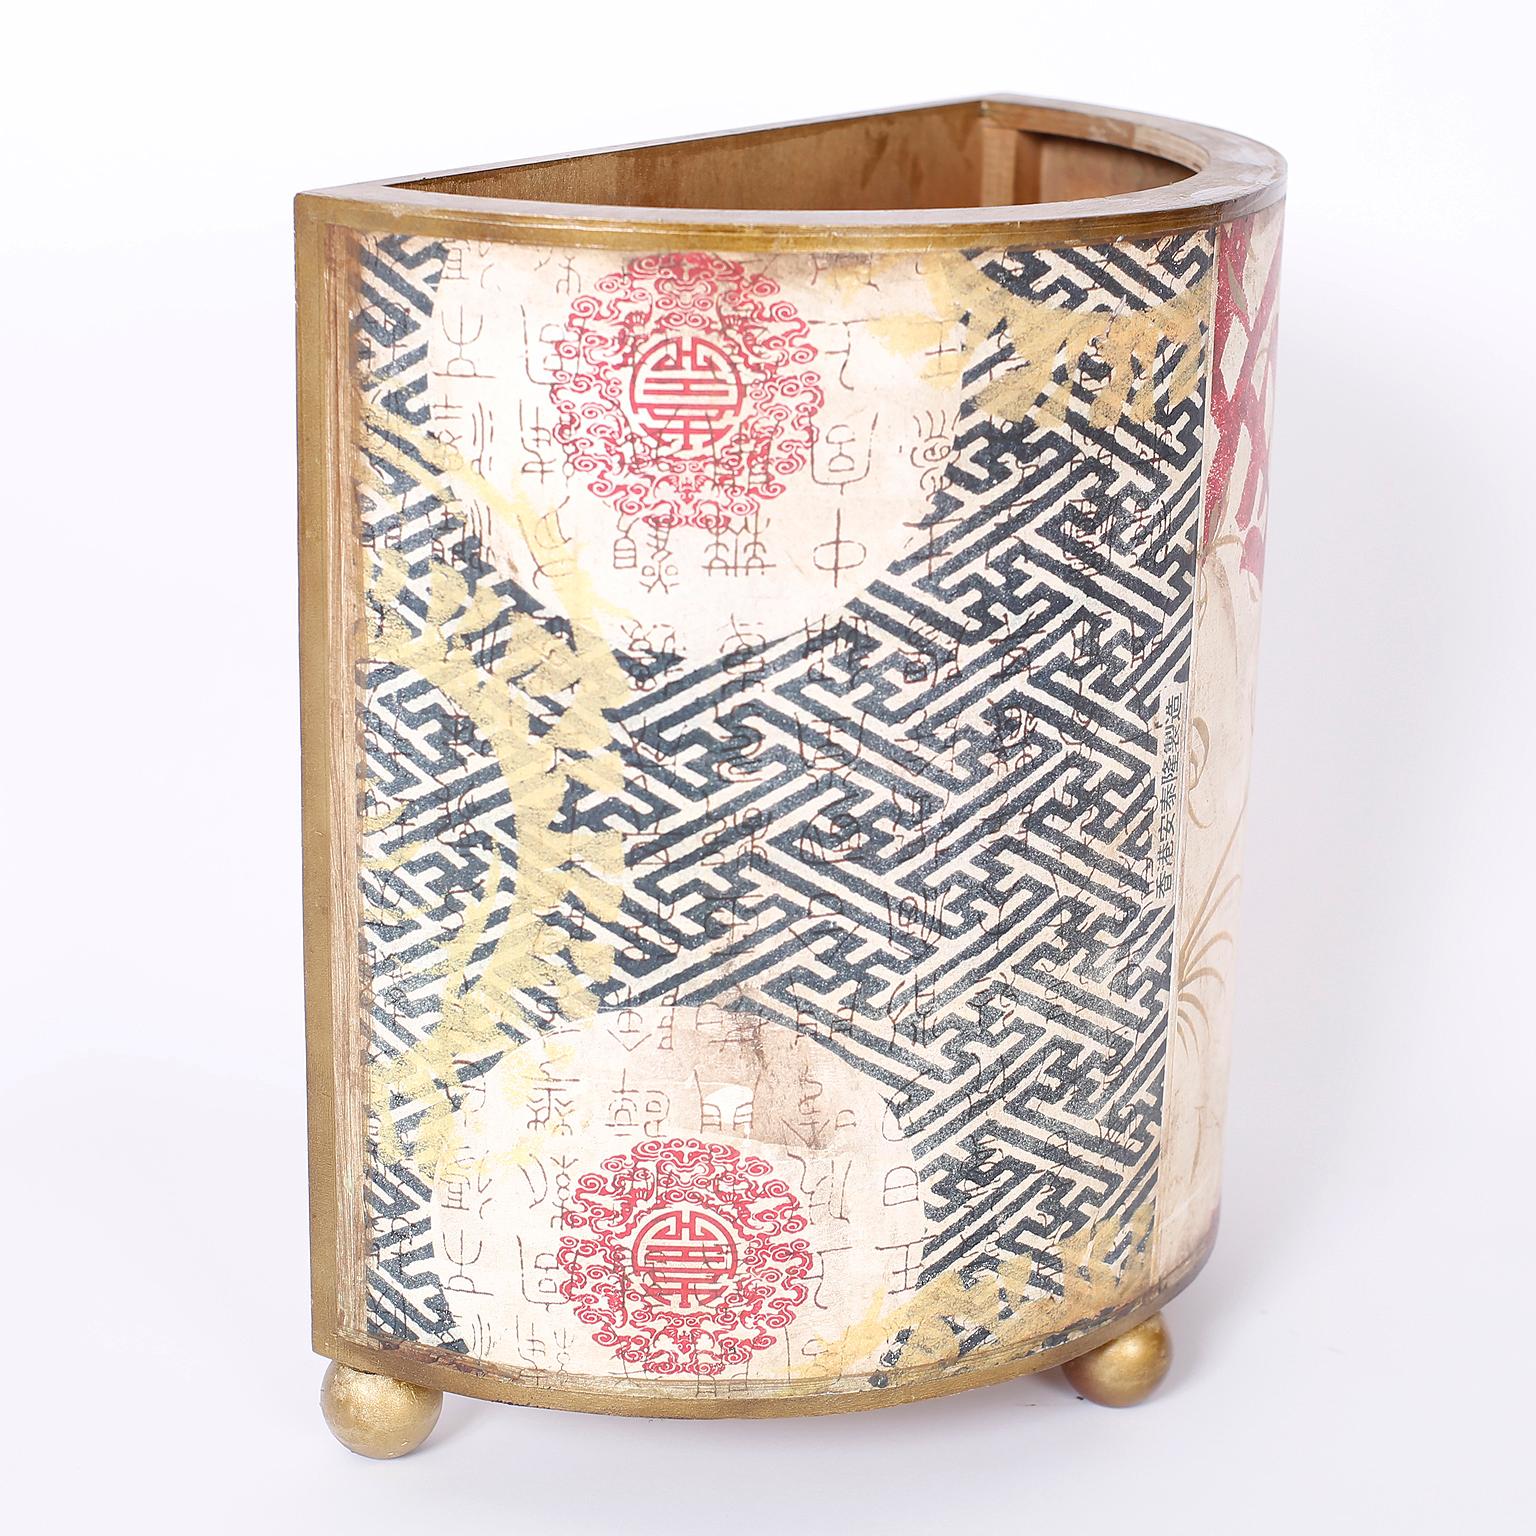 Demilune wastepaper basket or trash can decorated with lithographic Chinese characters against geometric and floral designs set on ball feet.